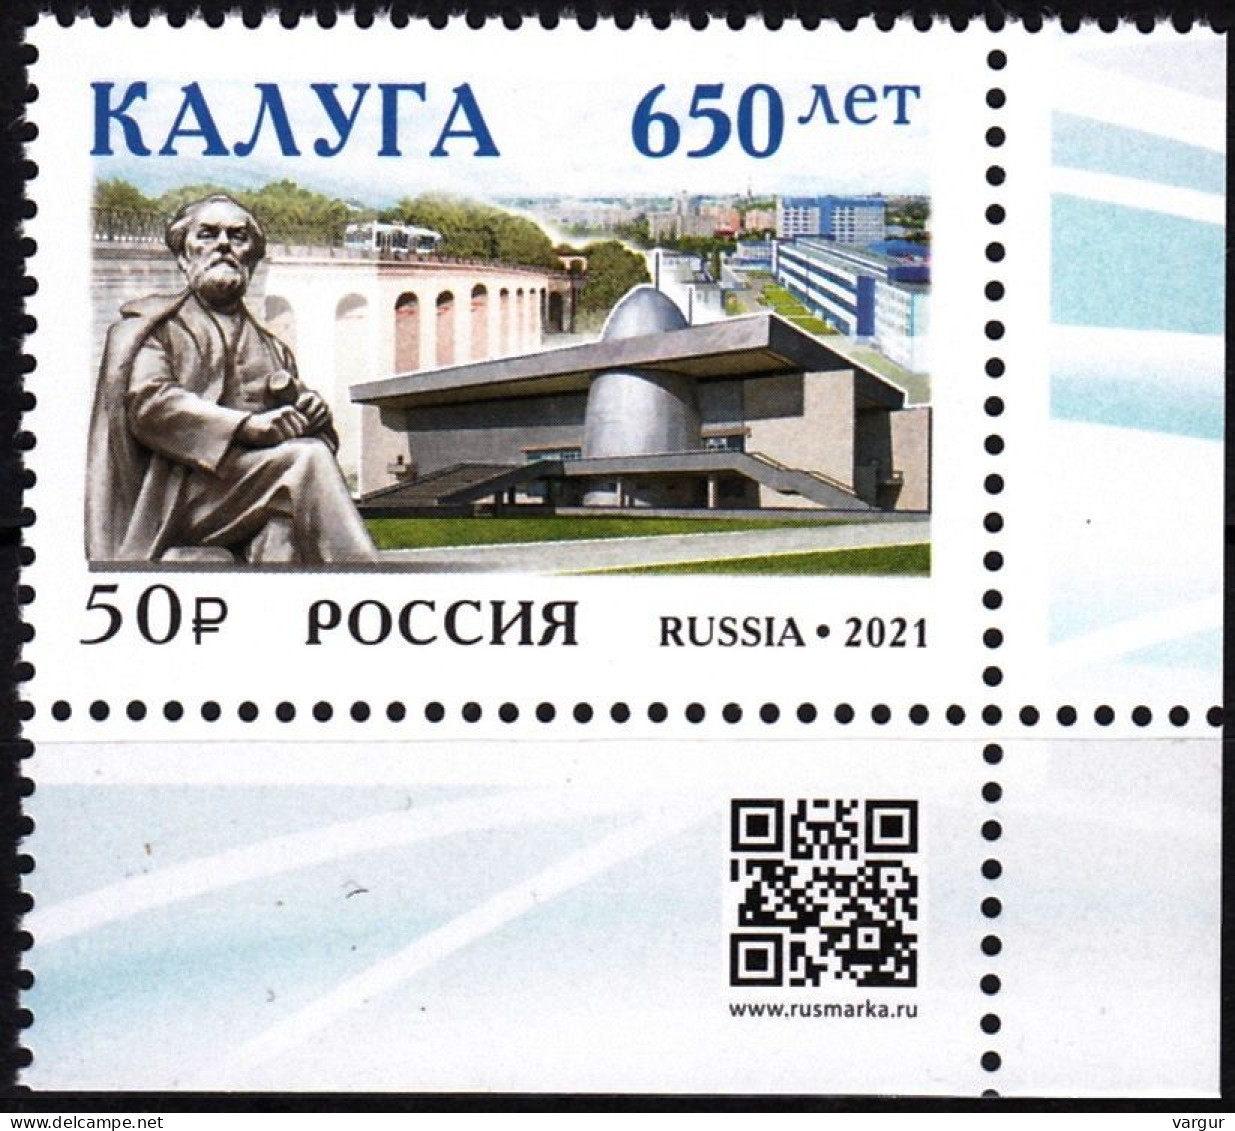 RUSSIA 2021-47 Architecture Space Monument. Kaluga Town - 650. QR CORNER, MNH - Russia & URSS